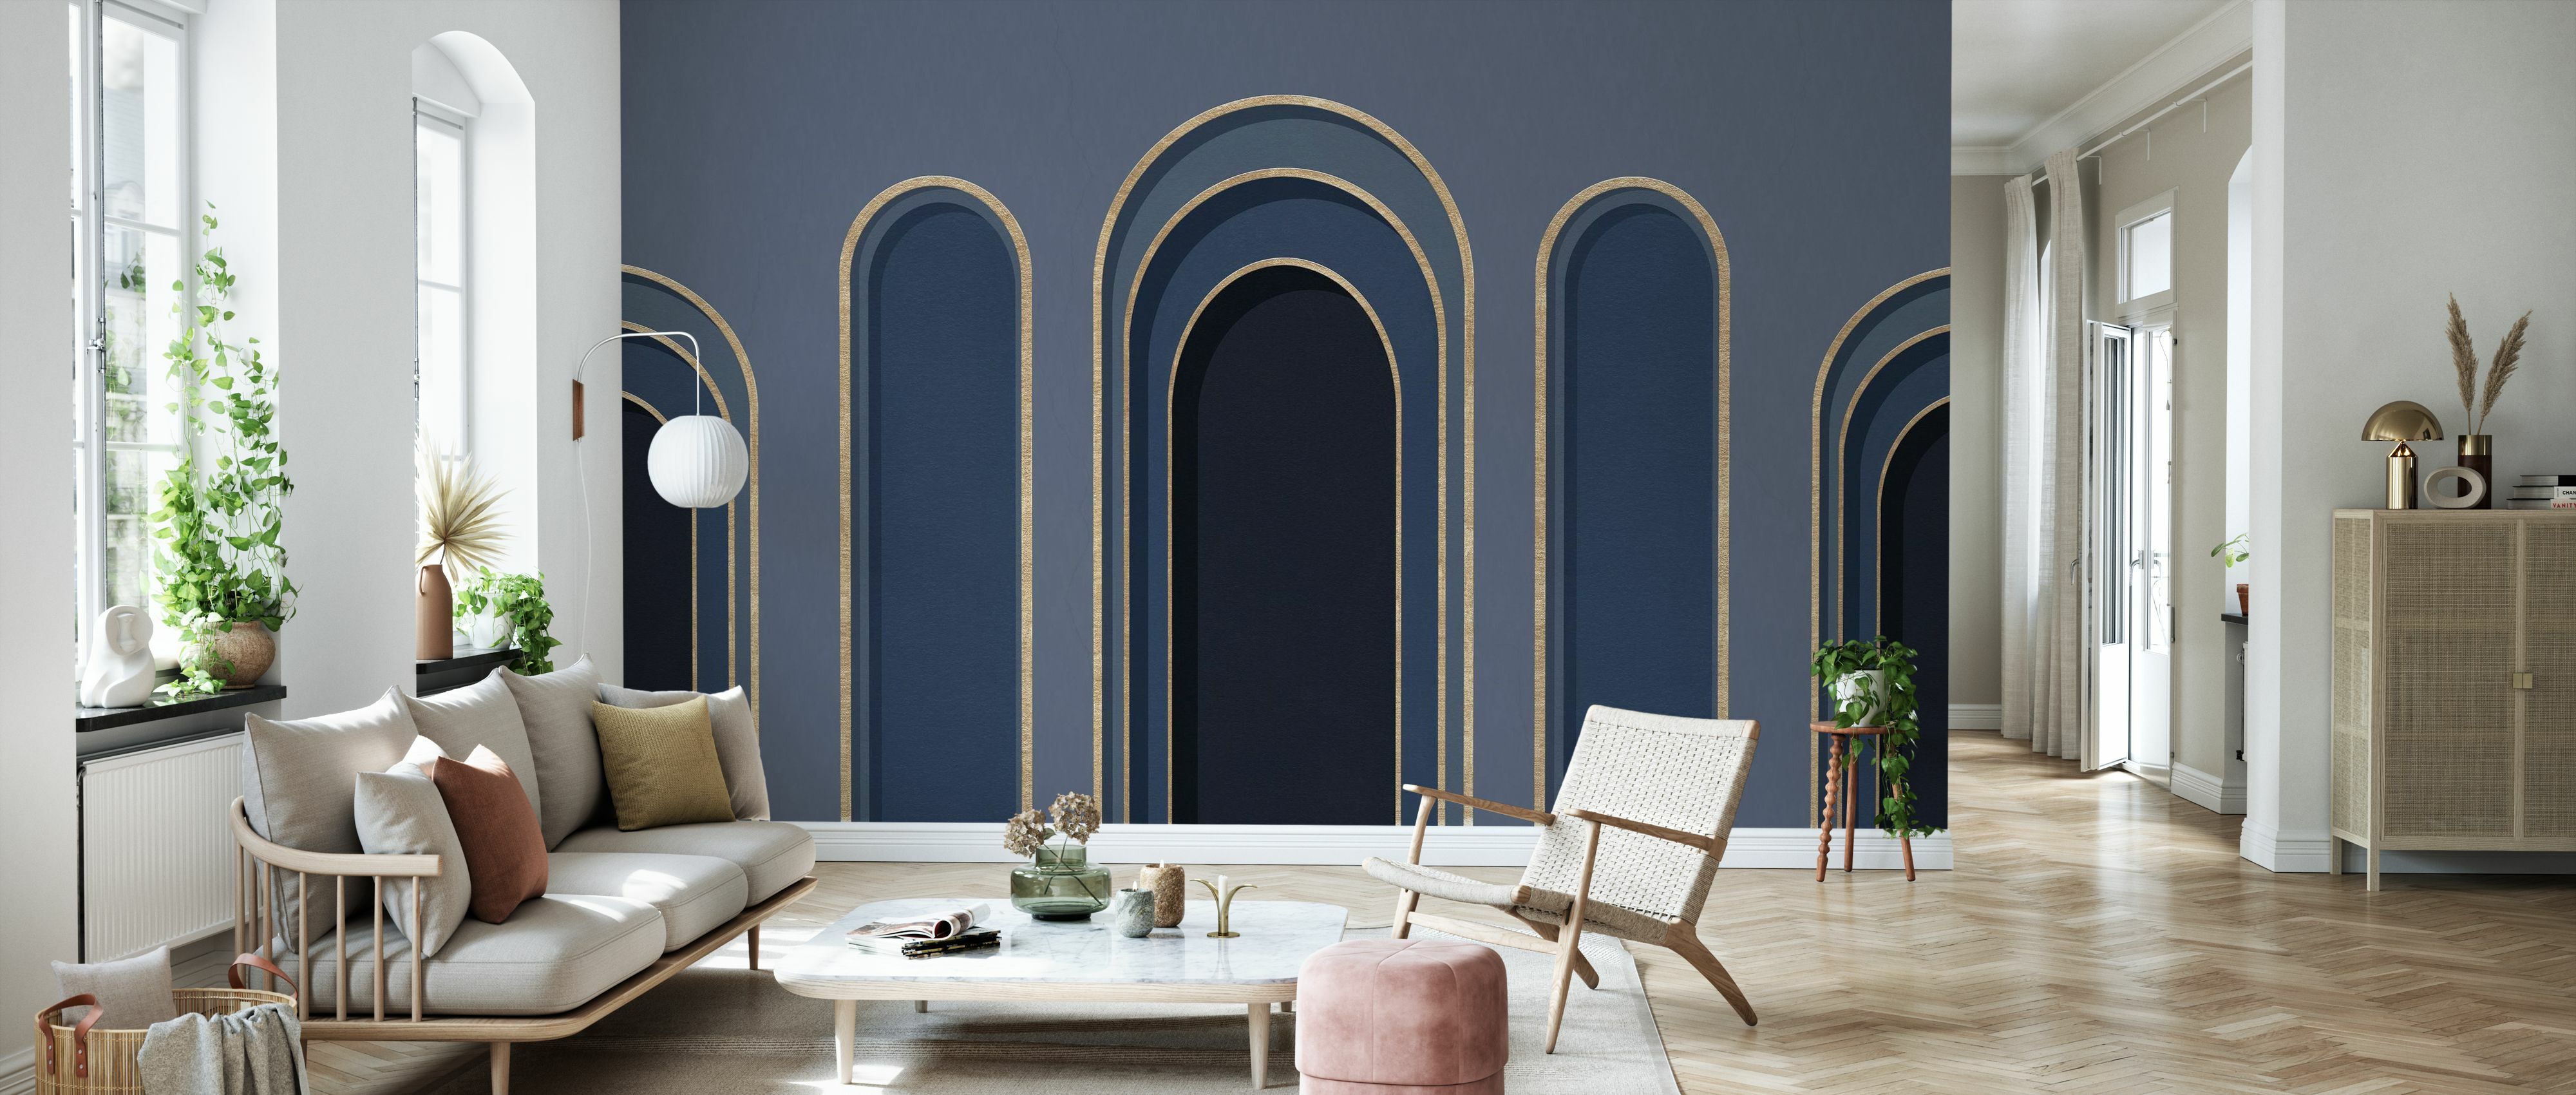 Tapet Arch Adornment, Blue, Photowall